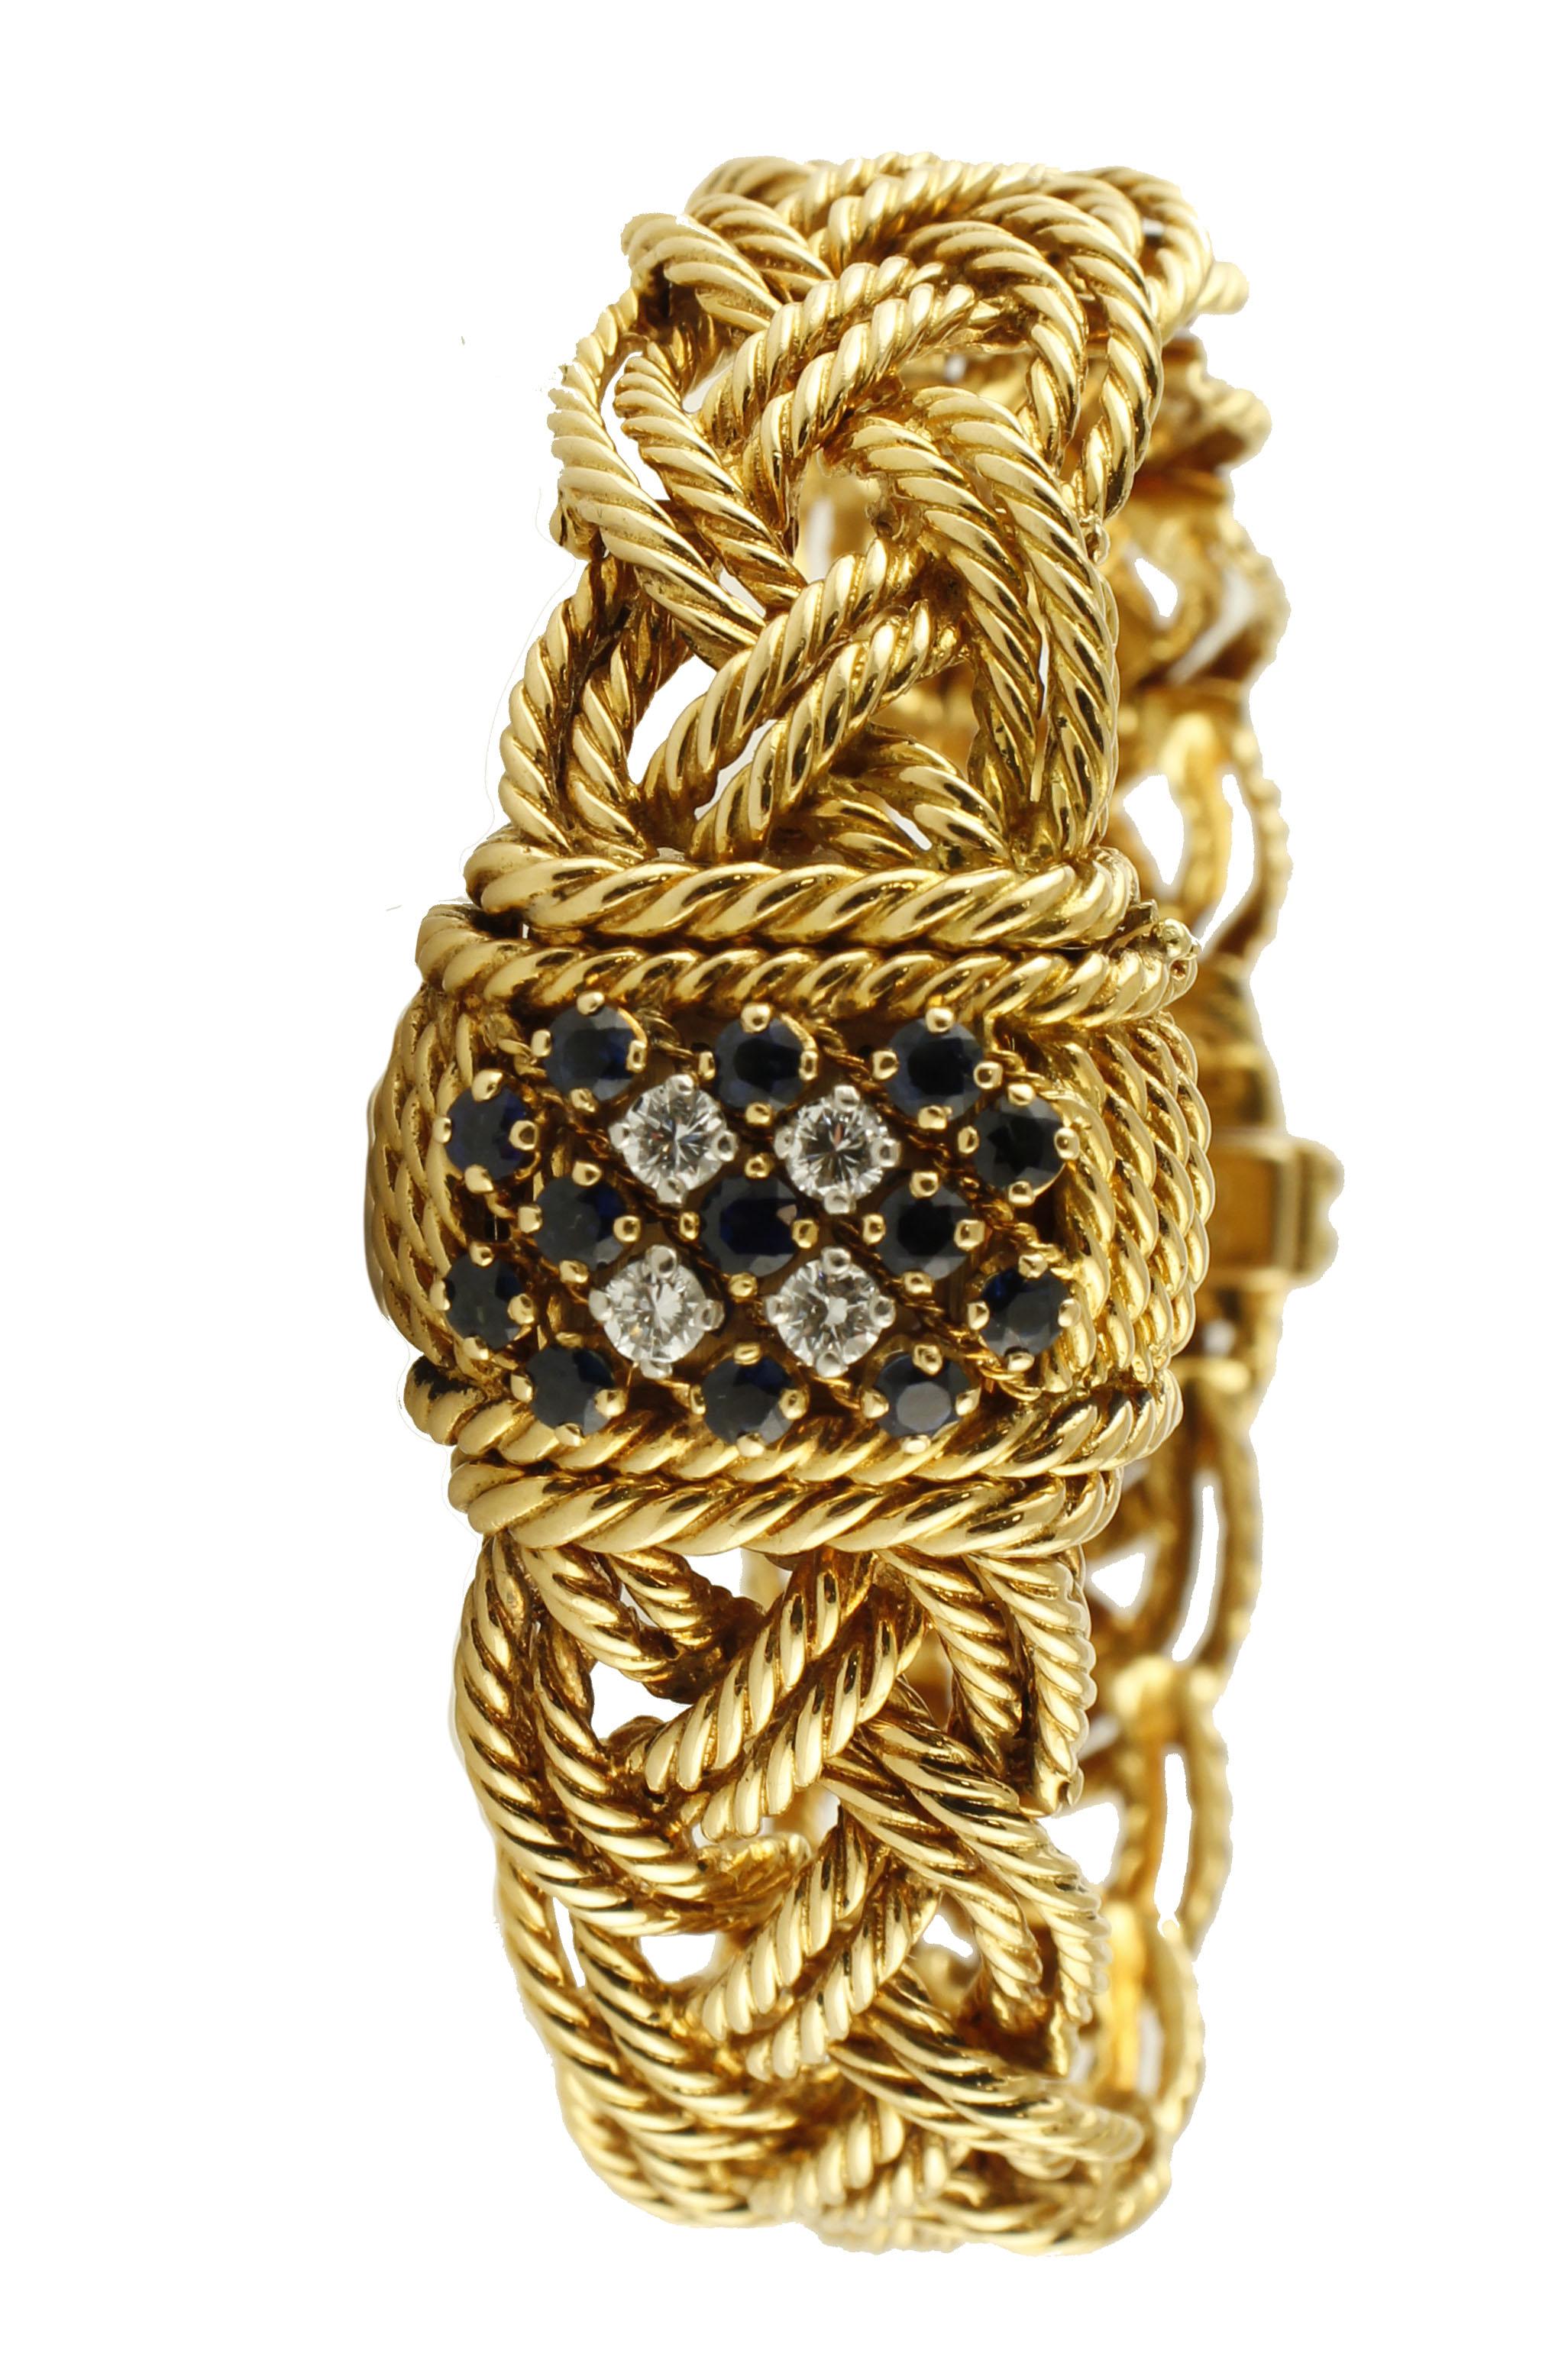 SHIPPING POLICY: 
No additional costs will be added to this order. 
Shipping costs will be totally covered by the seller (customs duties included).

Astonishing retro cuff bracelet/watch in 18k yellow gold knitted structure. The bracelet features a